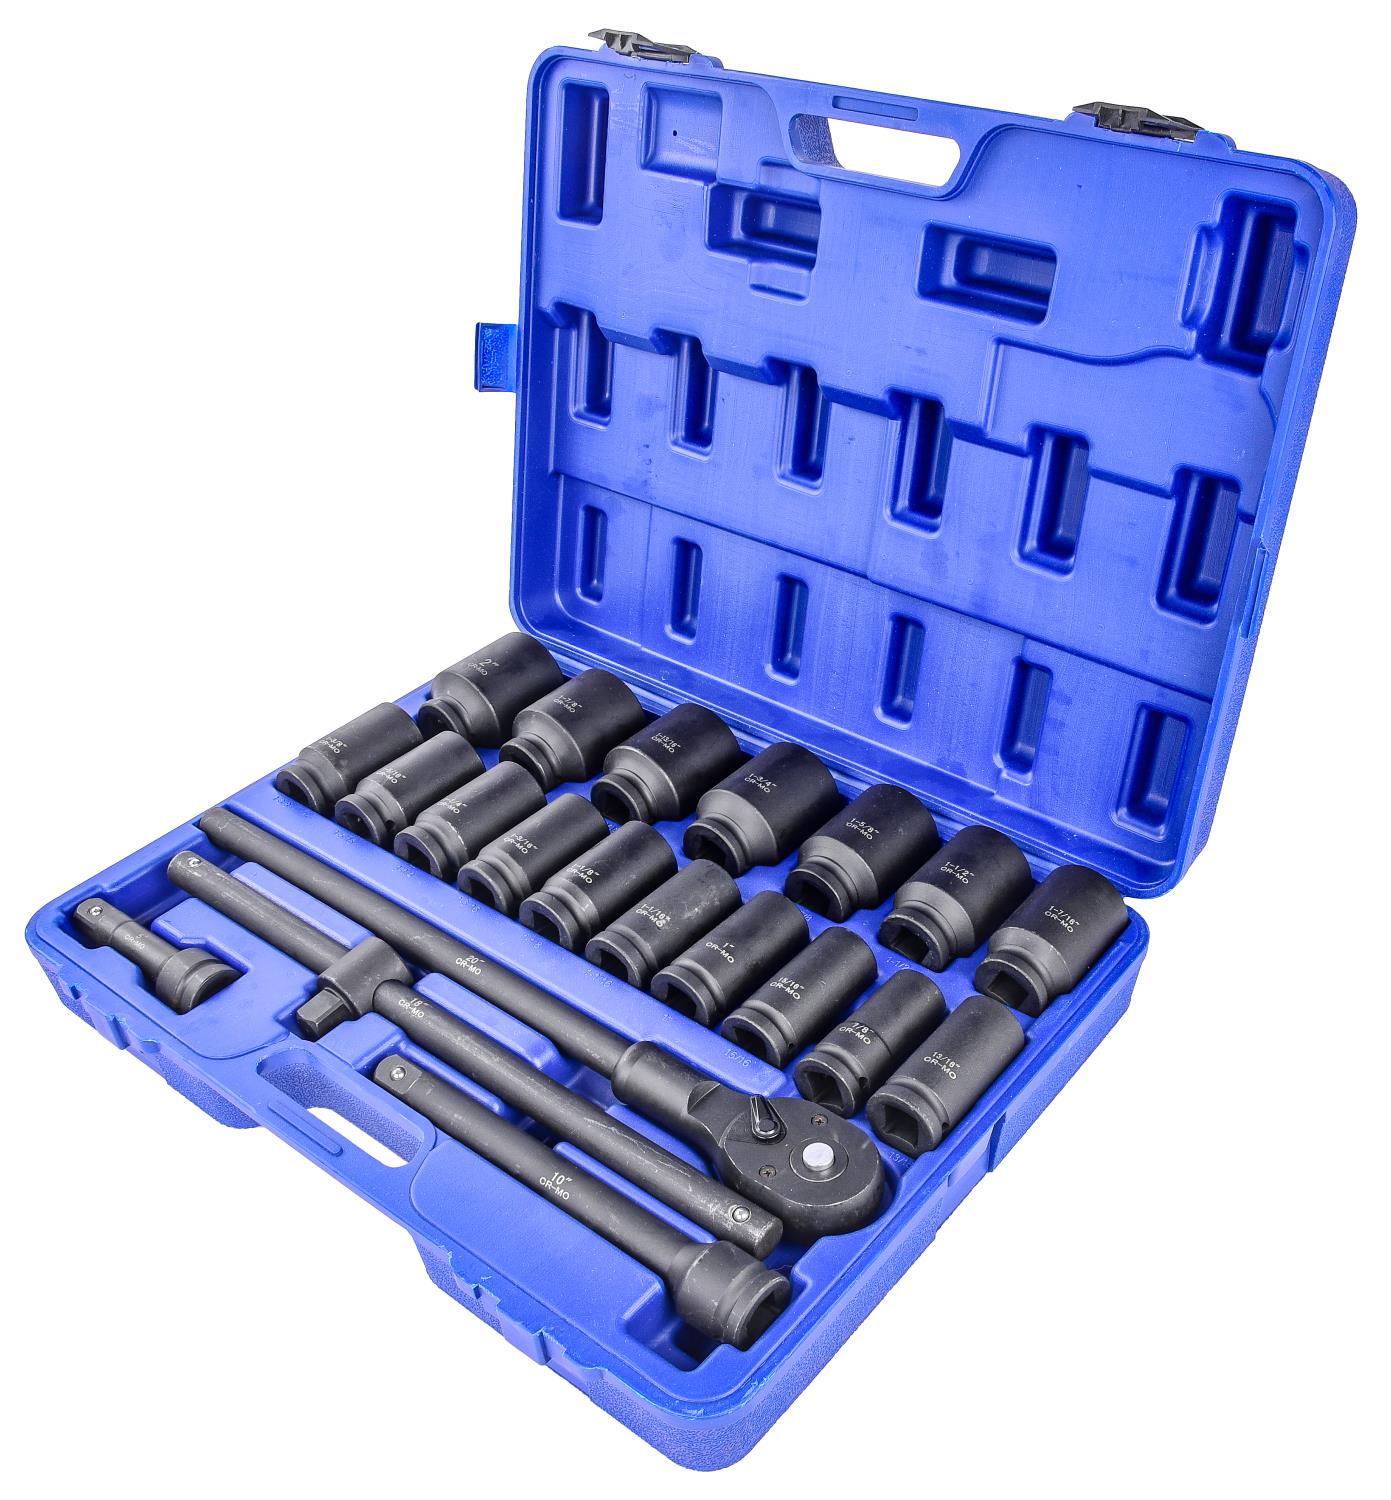 JEGS 58200: 22-Piece Impact Socket Set | 3/4 in. Drive | SAE | 6-Point |  Deep Impact | Black-Oxide Coated Chrome-Moly Steel | Includes: (1) 3/4 in.  Ratchet, (1) 5 in. Ext., (1) 10 in. Ext., (1) 18 in. Sliding "T" Bar, (17)  Sockets - JEGS